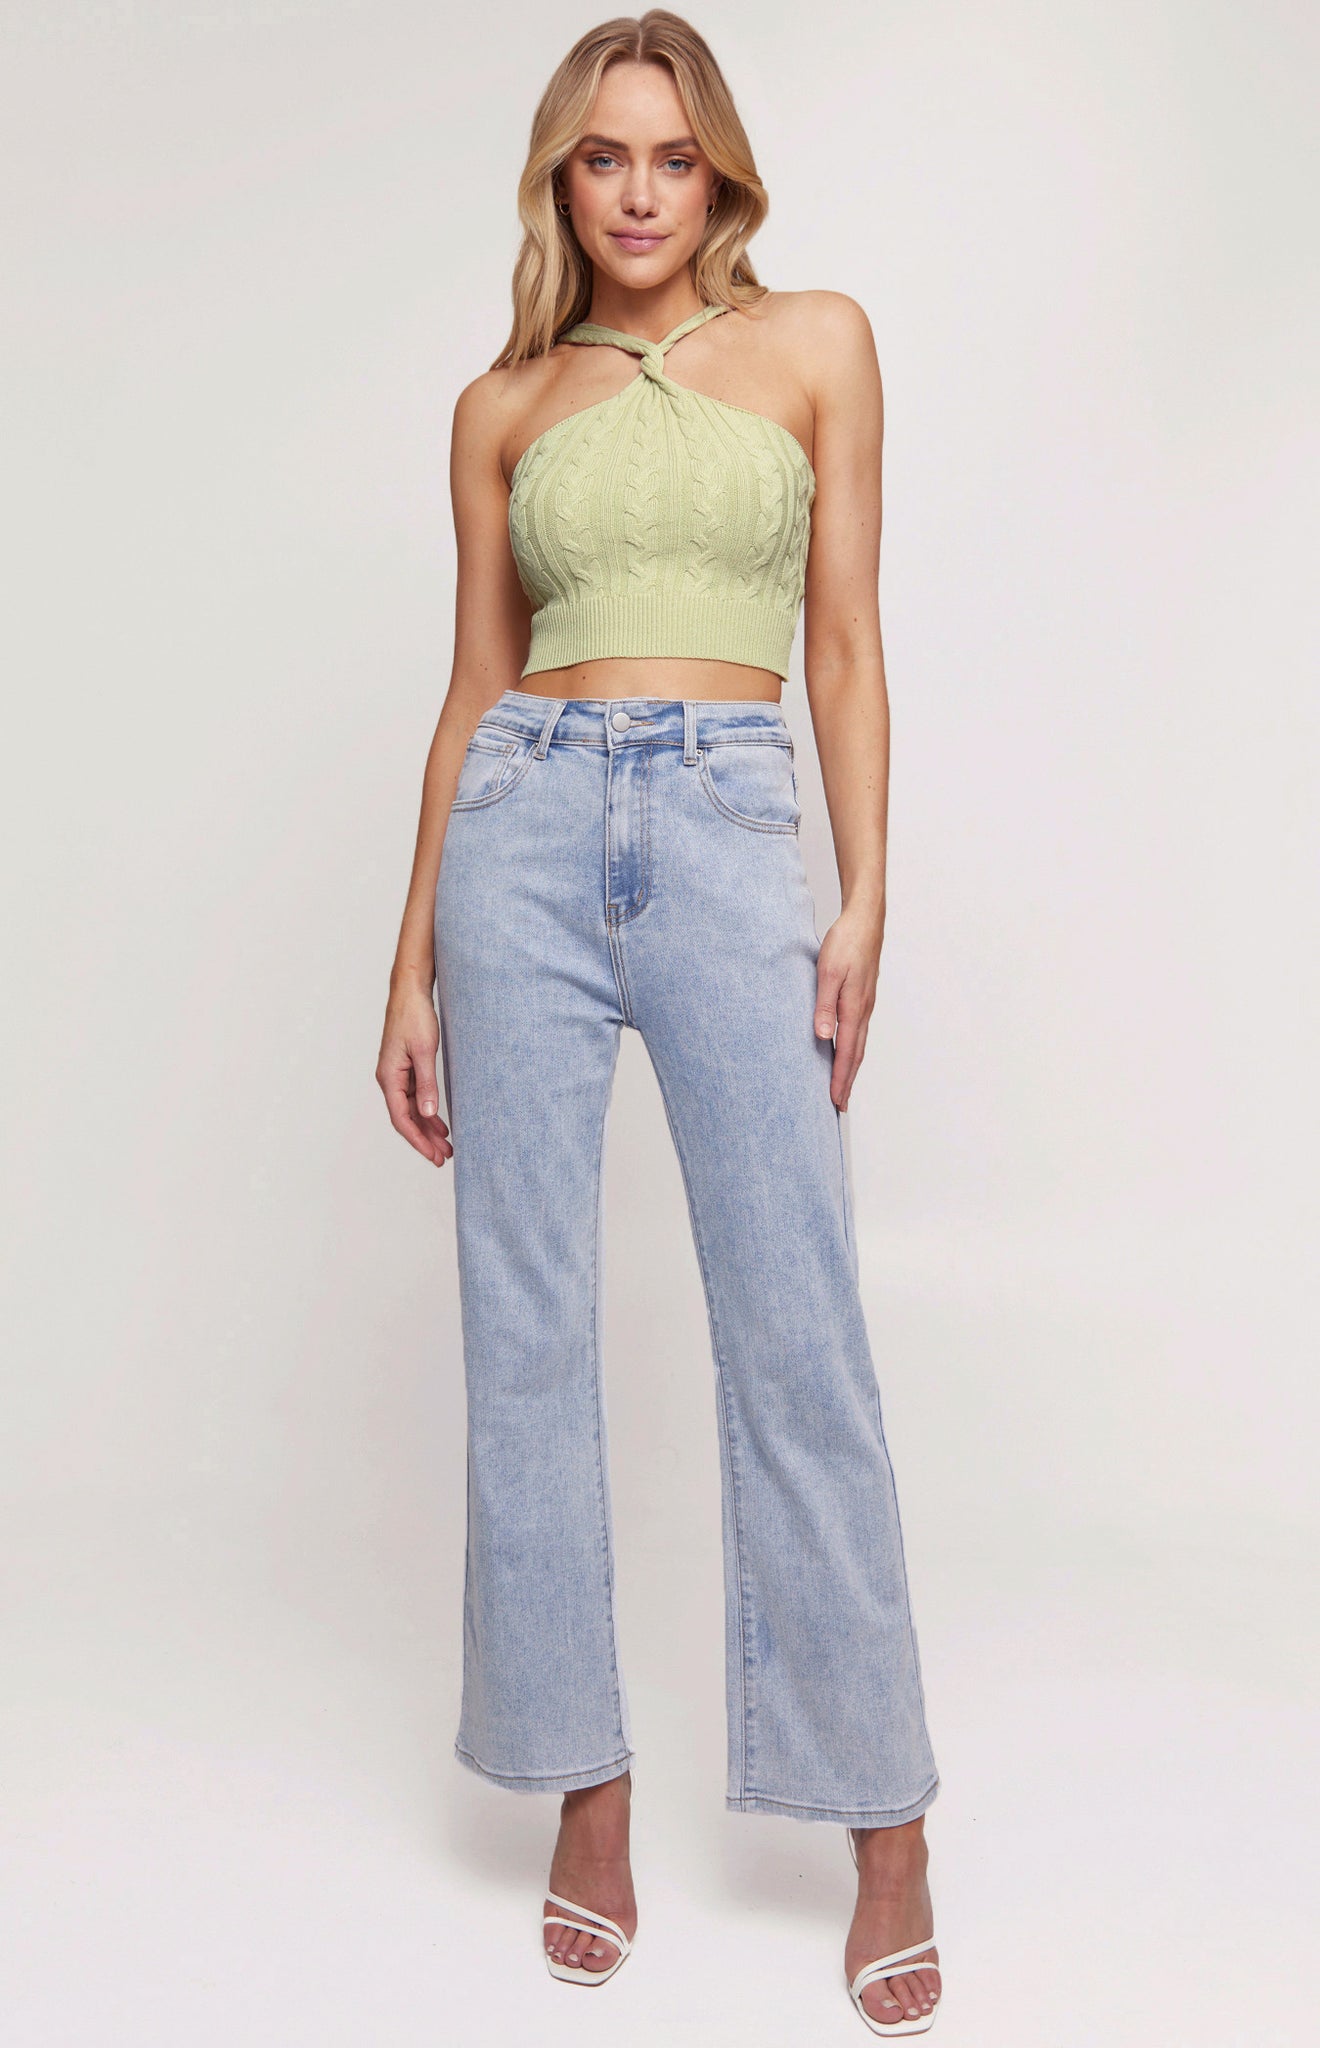 Taytay Twist Front Neckline Cable Knit Crop